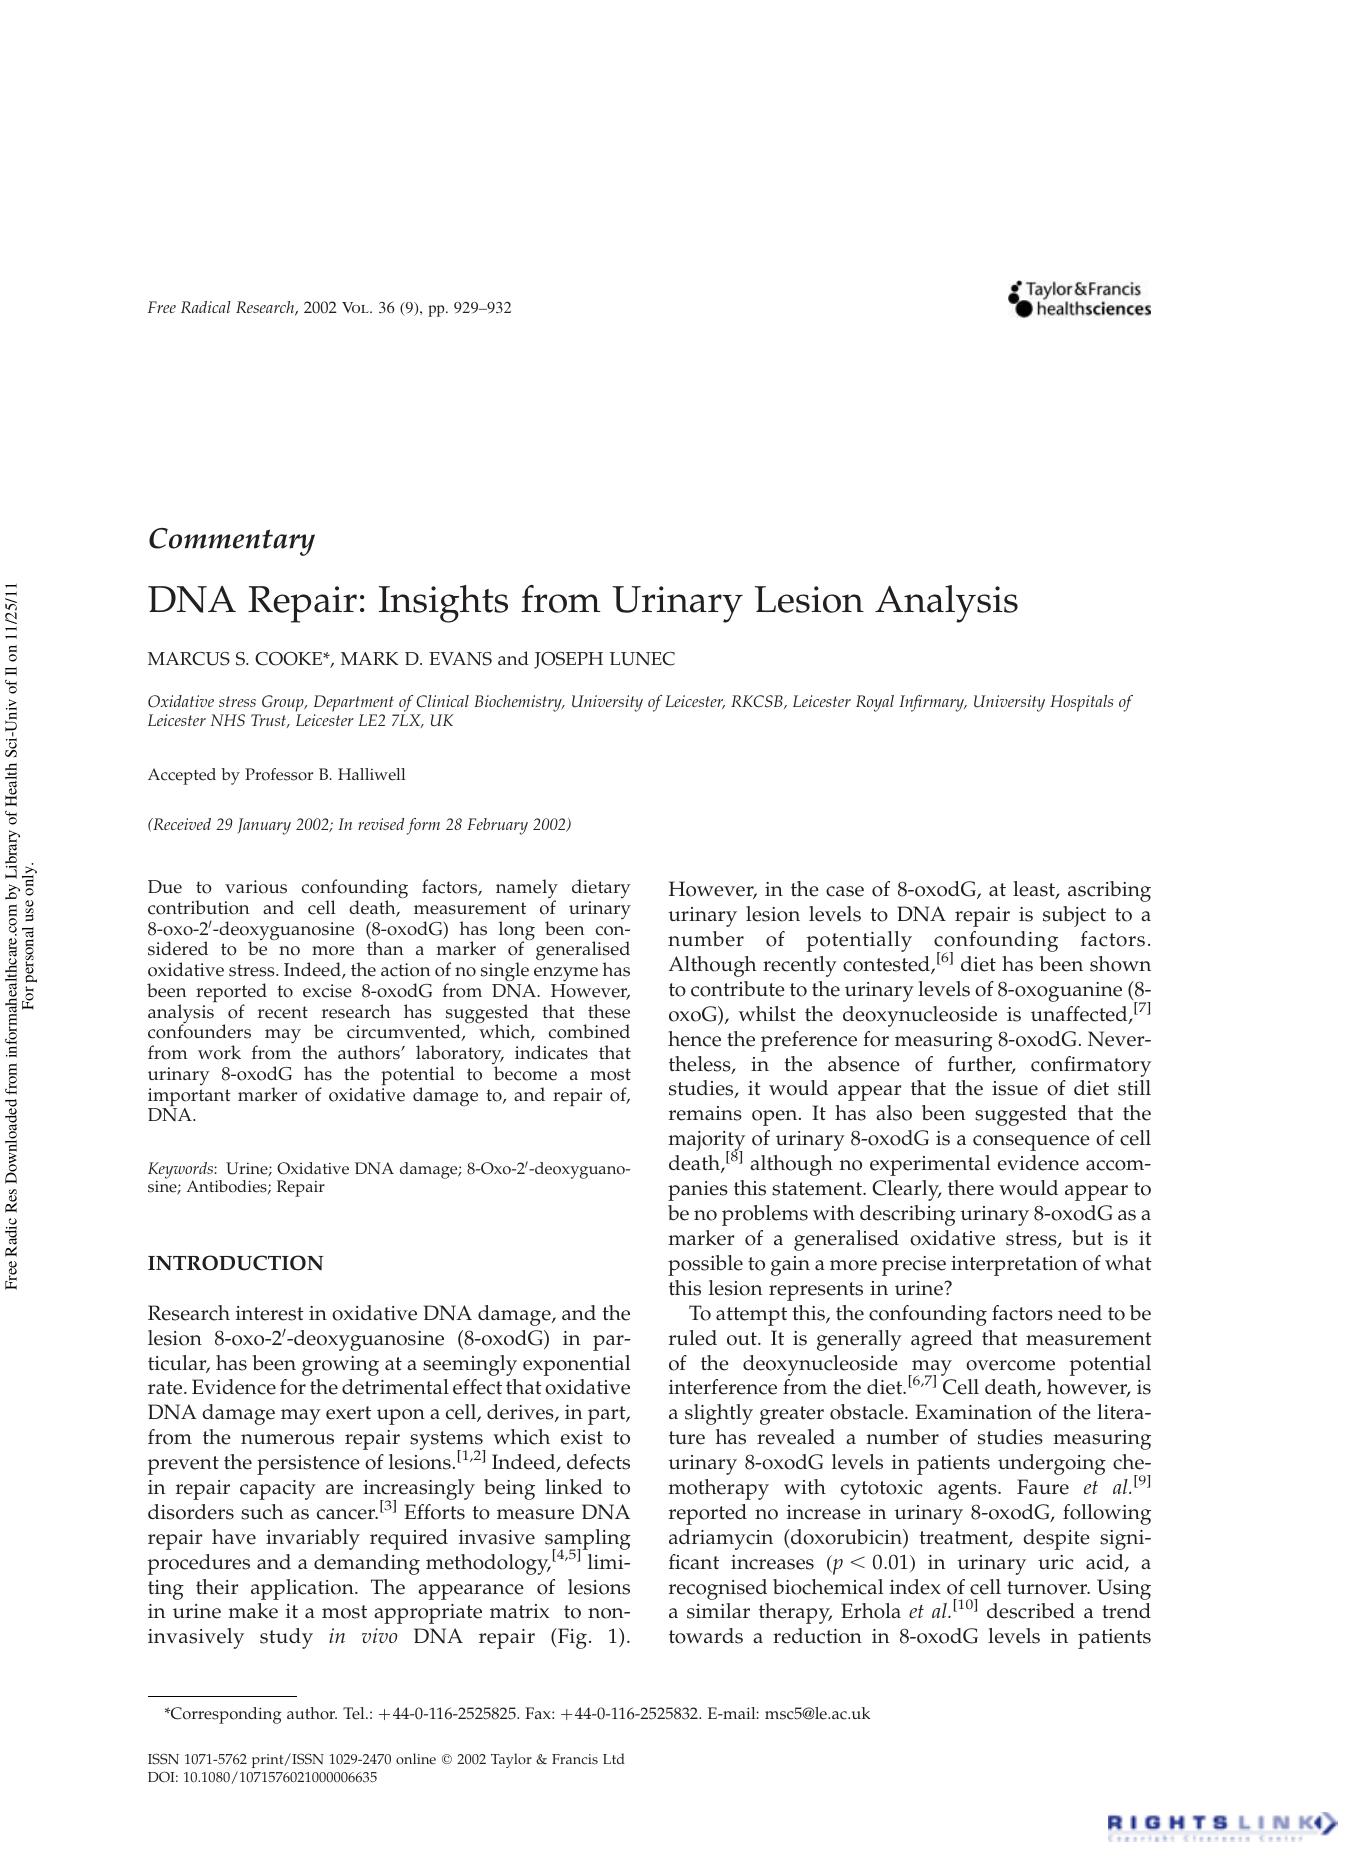 DNA Repair: Insights from Urinary Lesion Analysis by Marcus S. Cooke Mark D. Evans & Joseph Lunec